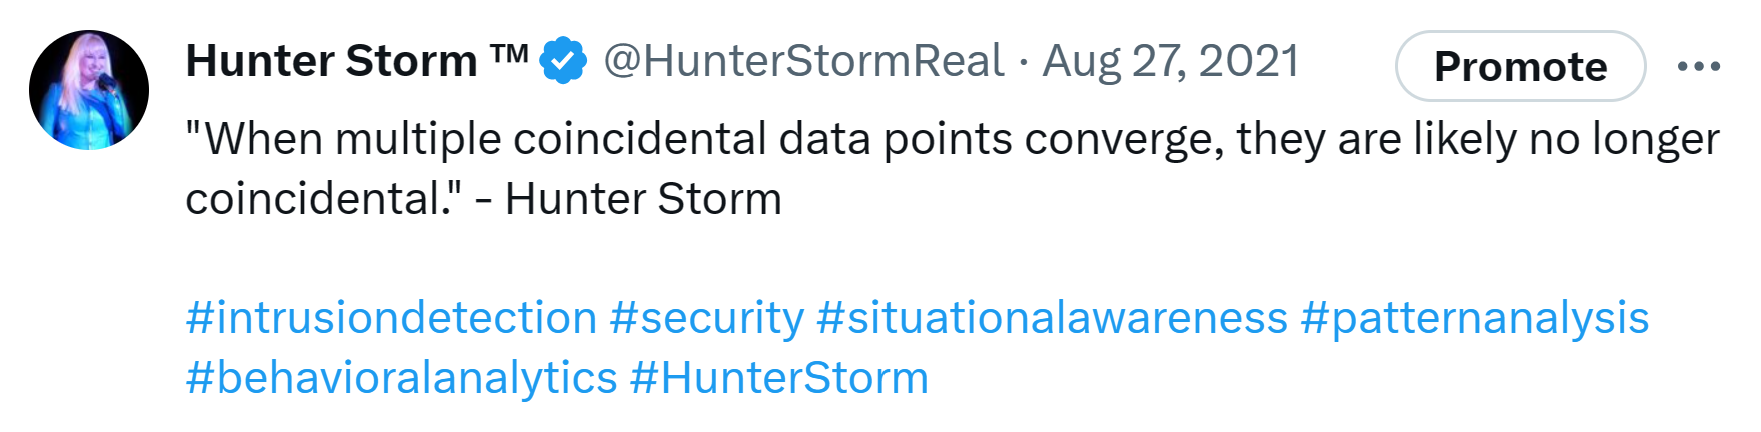 Hunter Storm Wisdom: Timeless Insights and Inspiration | "When multiple coincidental data points converge, they are likely no longer coincidental."